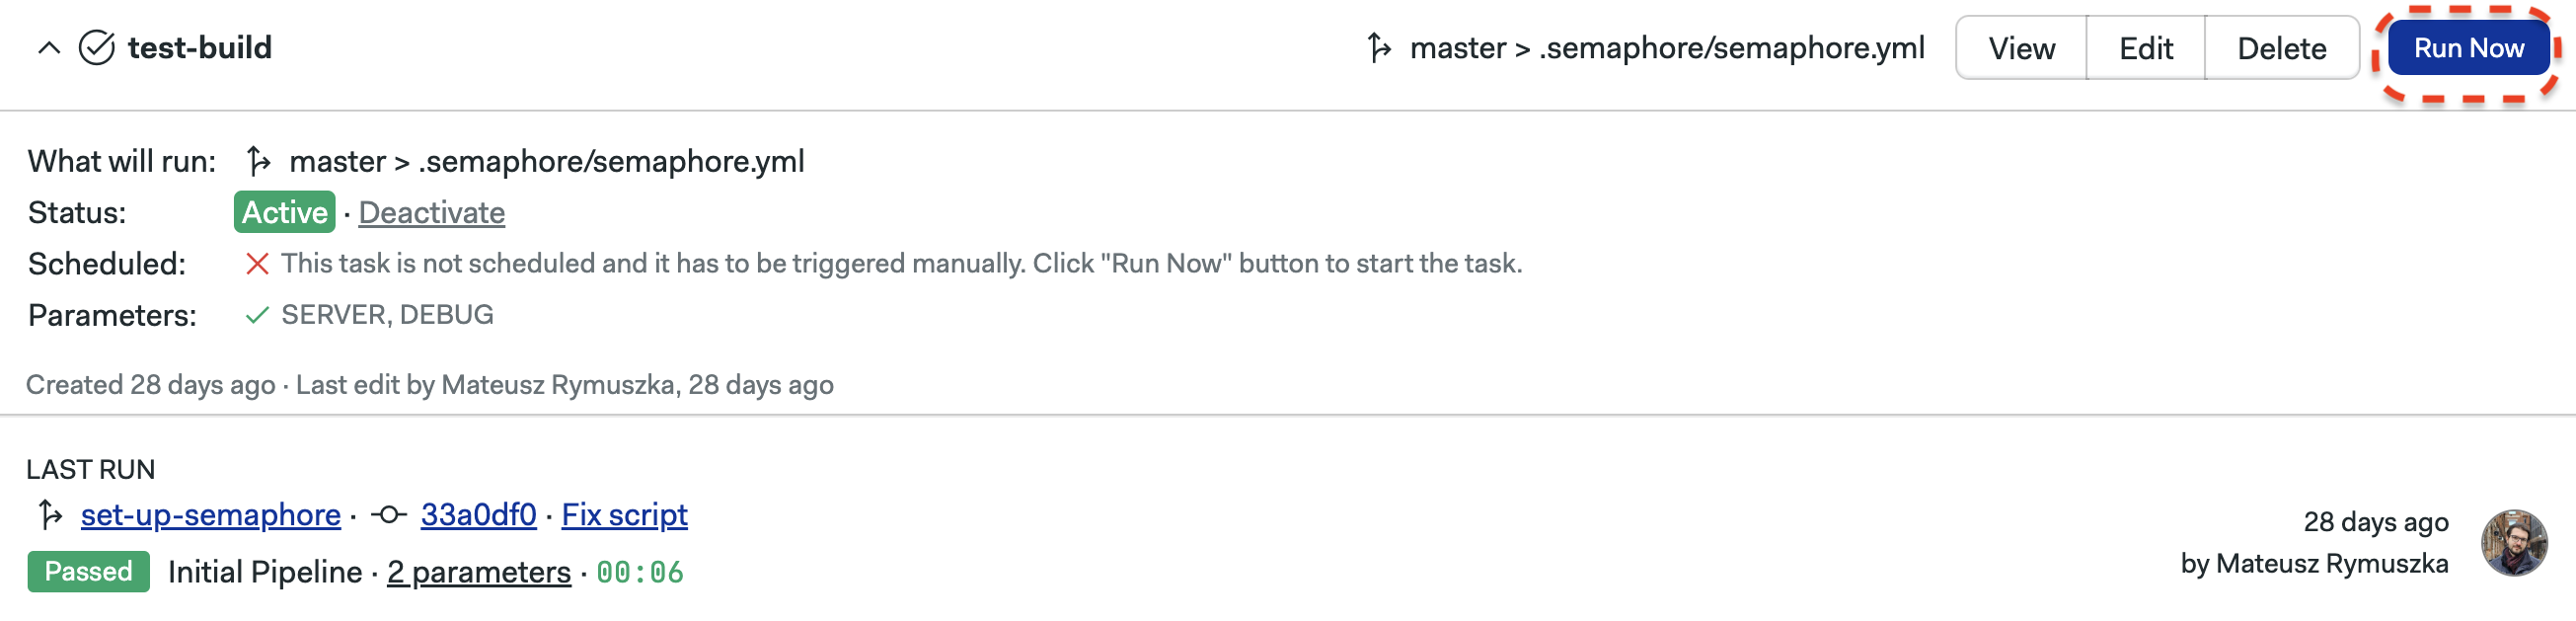 Deactivate button in the project tasks page